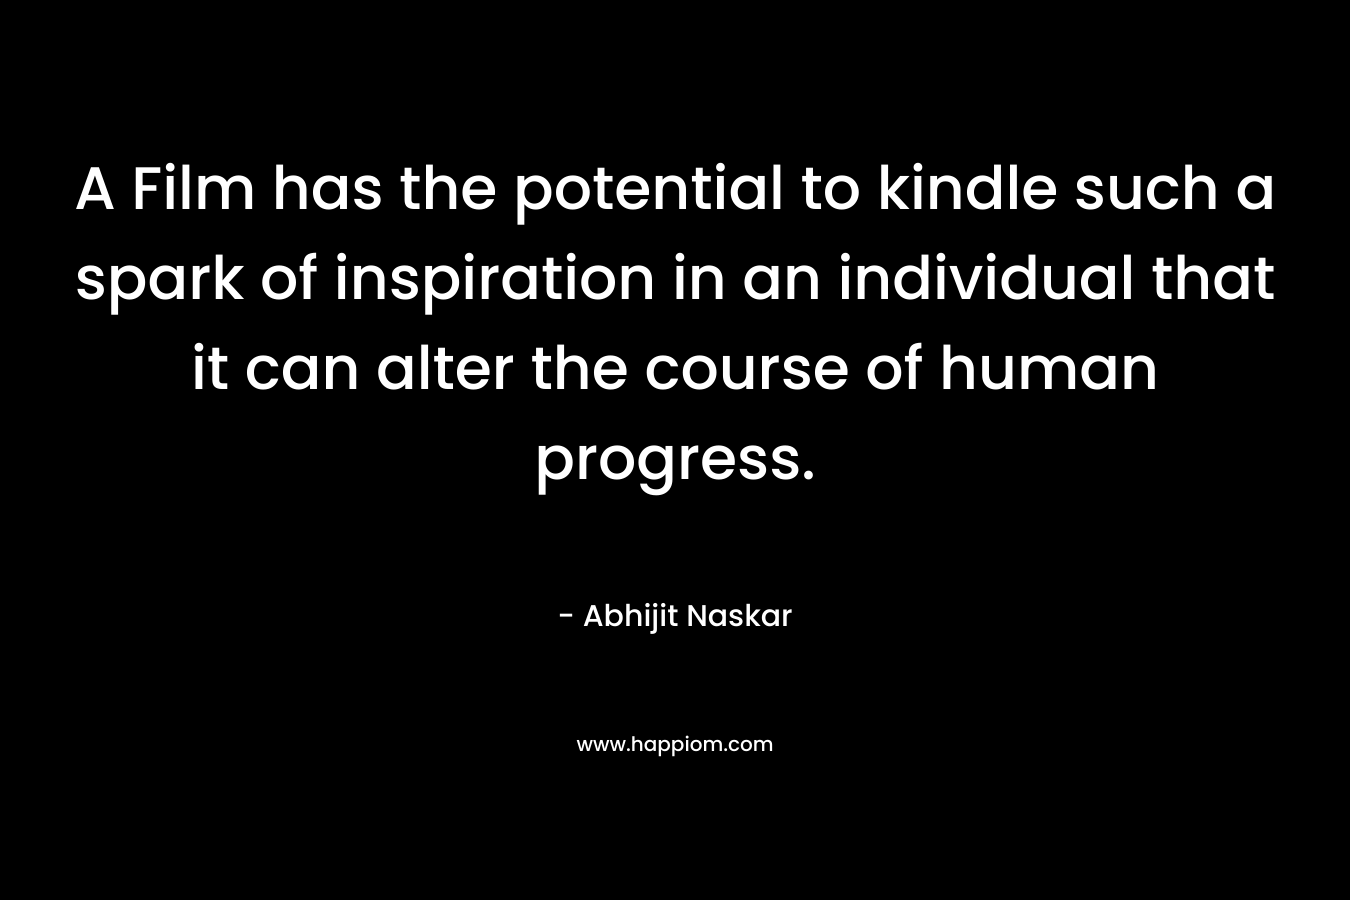 A Film has the potential to kindle such a spark of inspiration in an individual that it can alter the course of human progress. – Abhijit Naskar